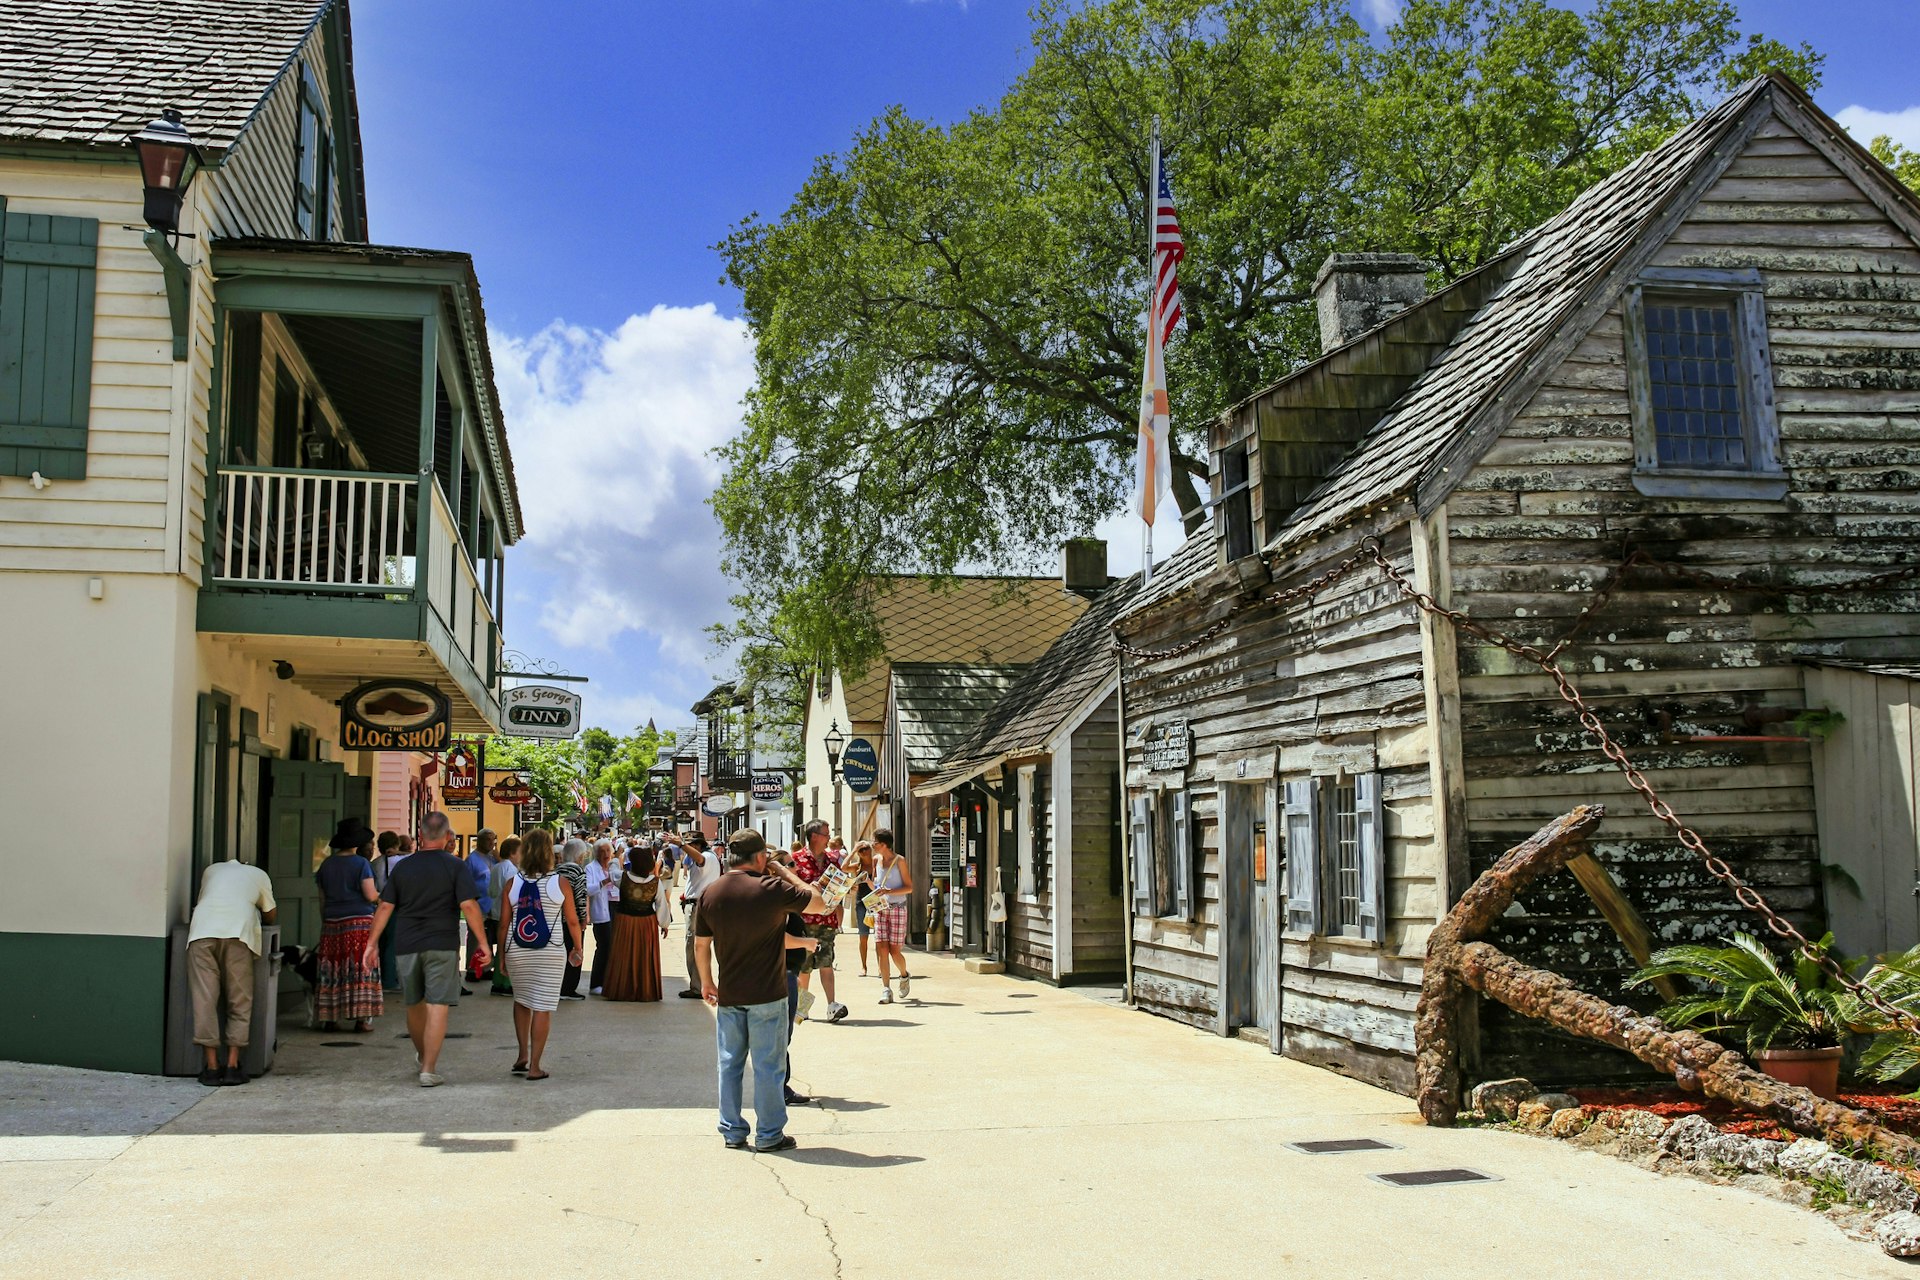 A pedestrian street scene with tourists mingling around in front of an old wooden school building